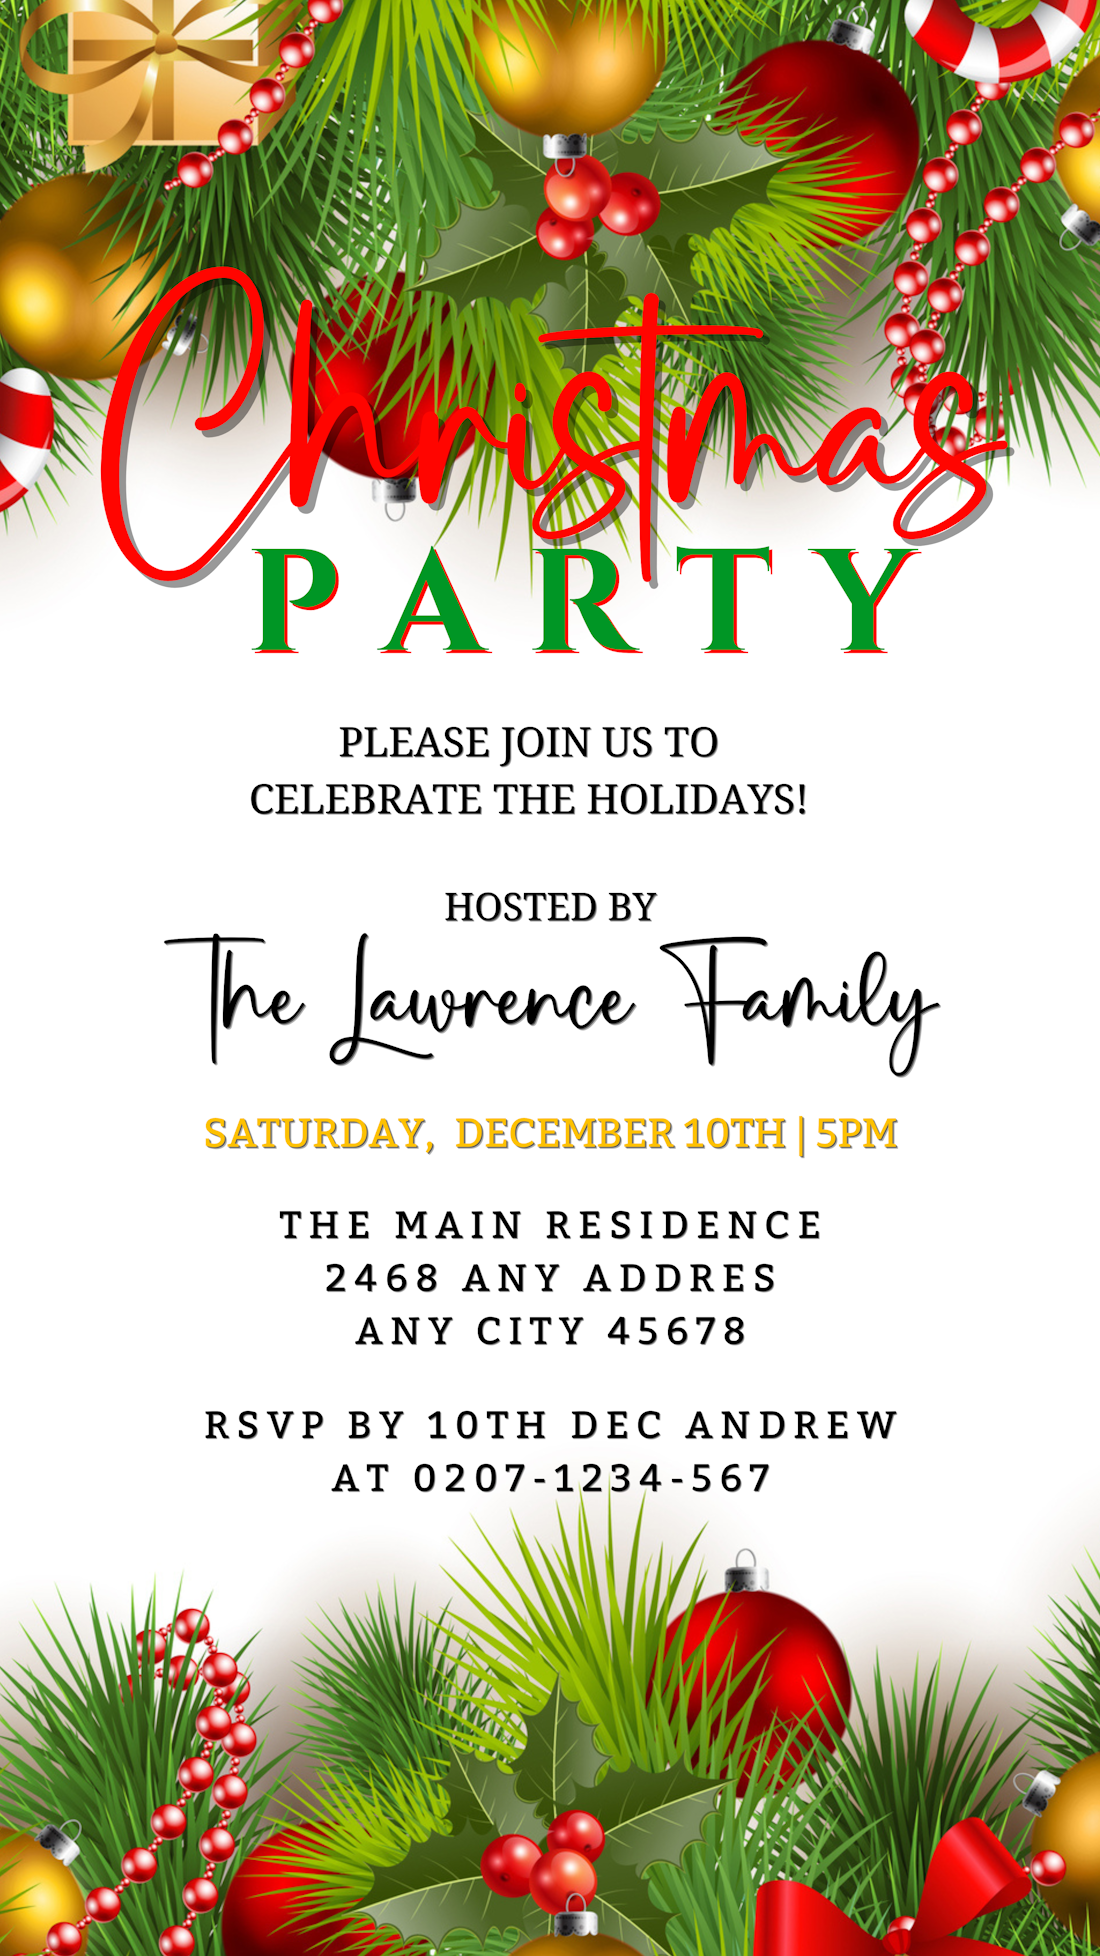 White Green Ornaments Christmas Party Invitation, DIY editable template showing festive decorations and text, customizable via Canva for easy electronic sharing.